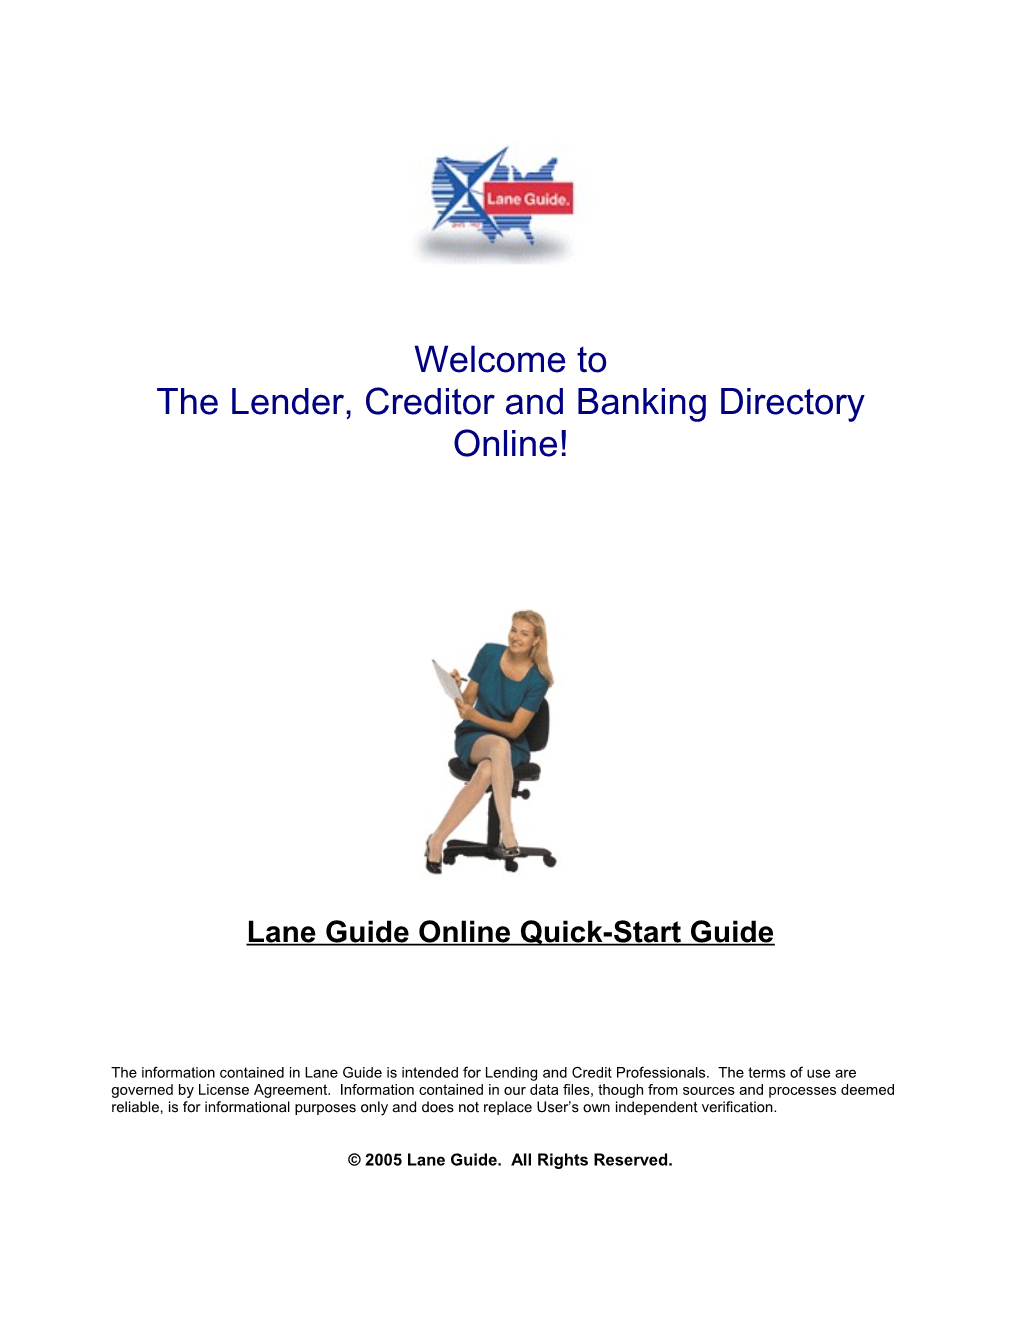 The Lender, Creditor and Banking Directory Online!